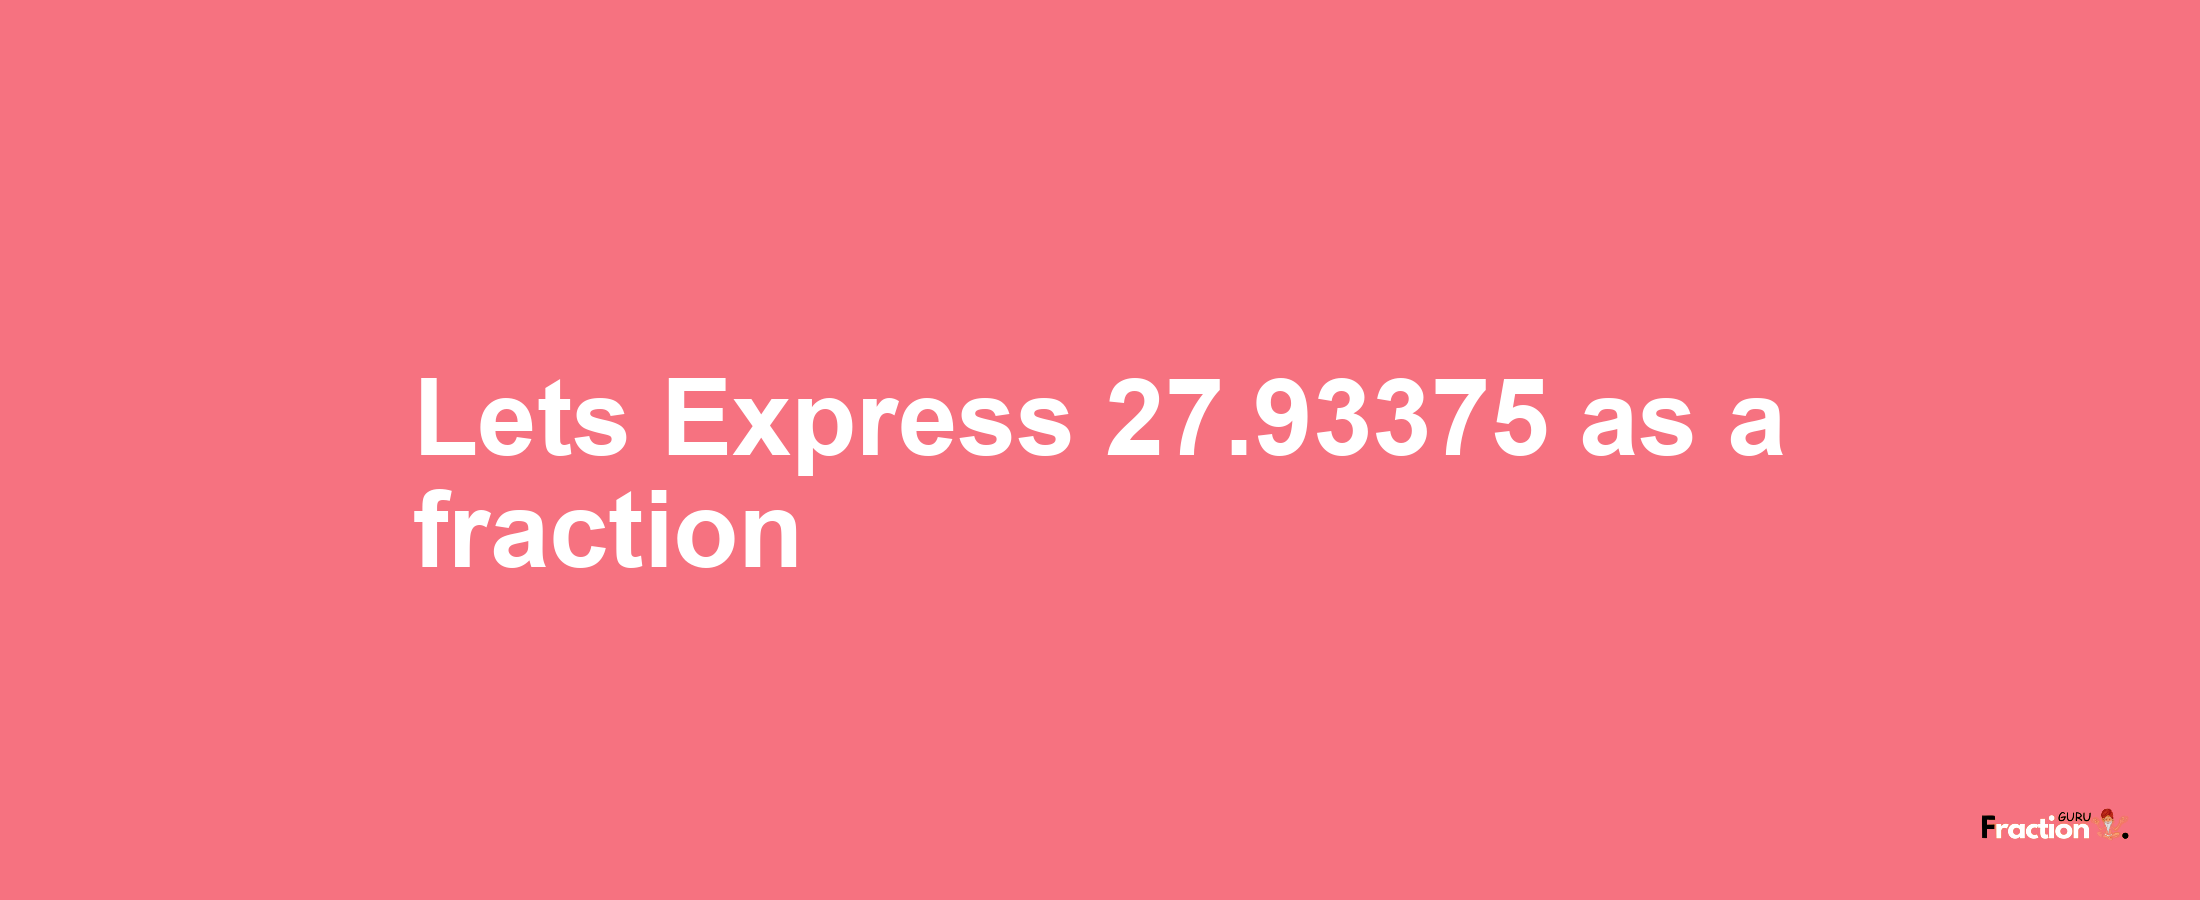 Lets Express 27.93375 as afraction